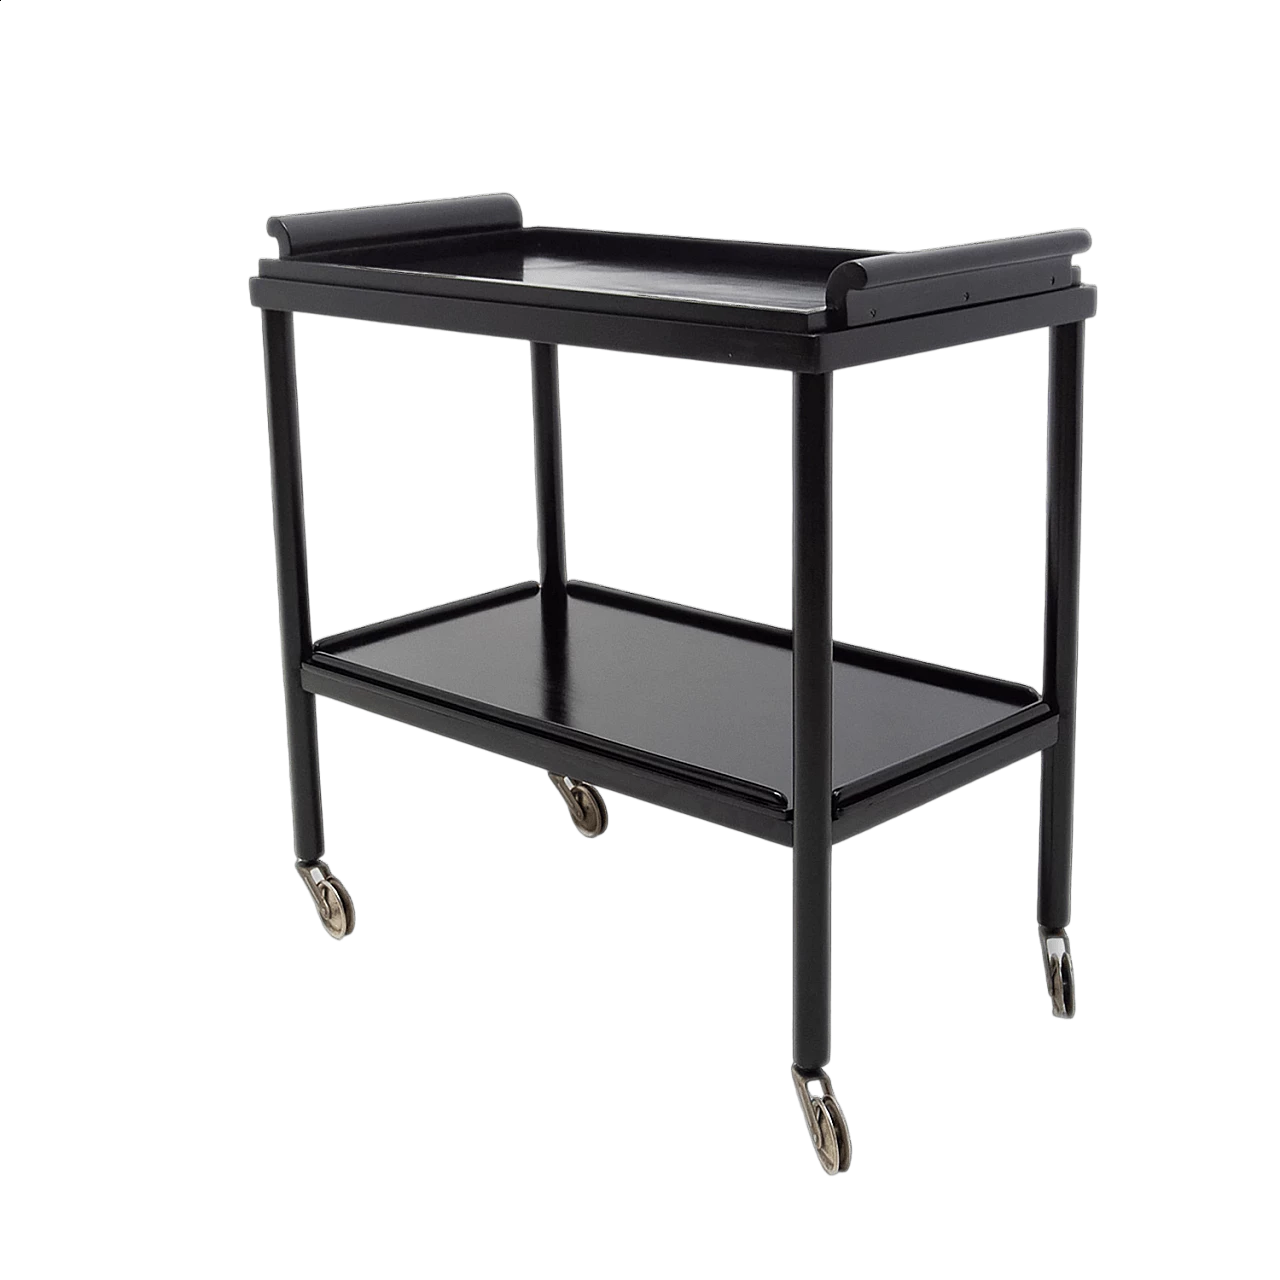 Thonet T-359 service trolley, 1930s 24